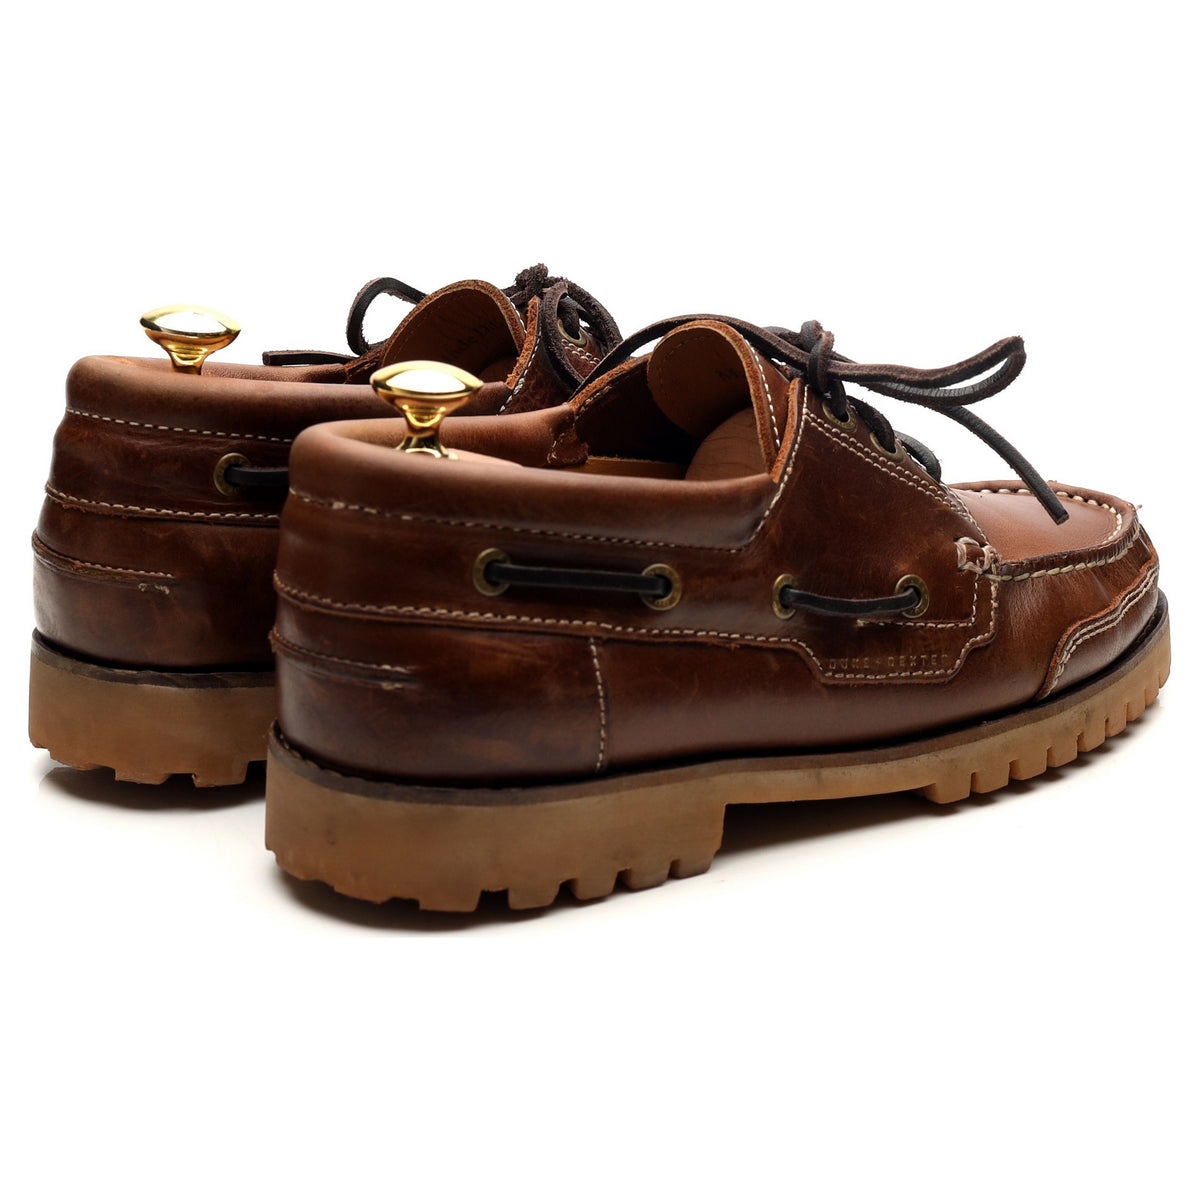 Brown Leather Boat Shoes UK 8 EU 42